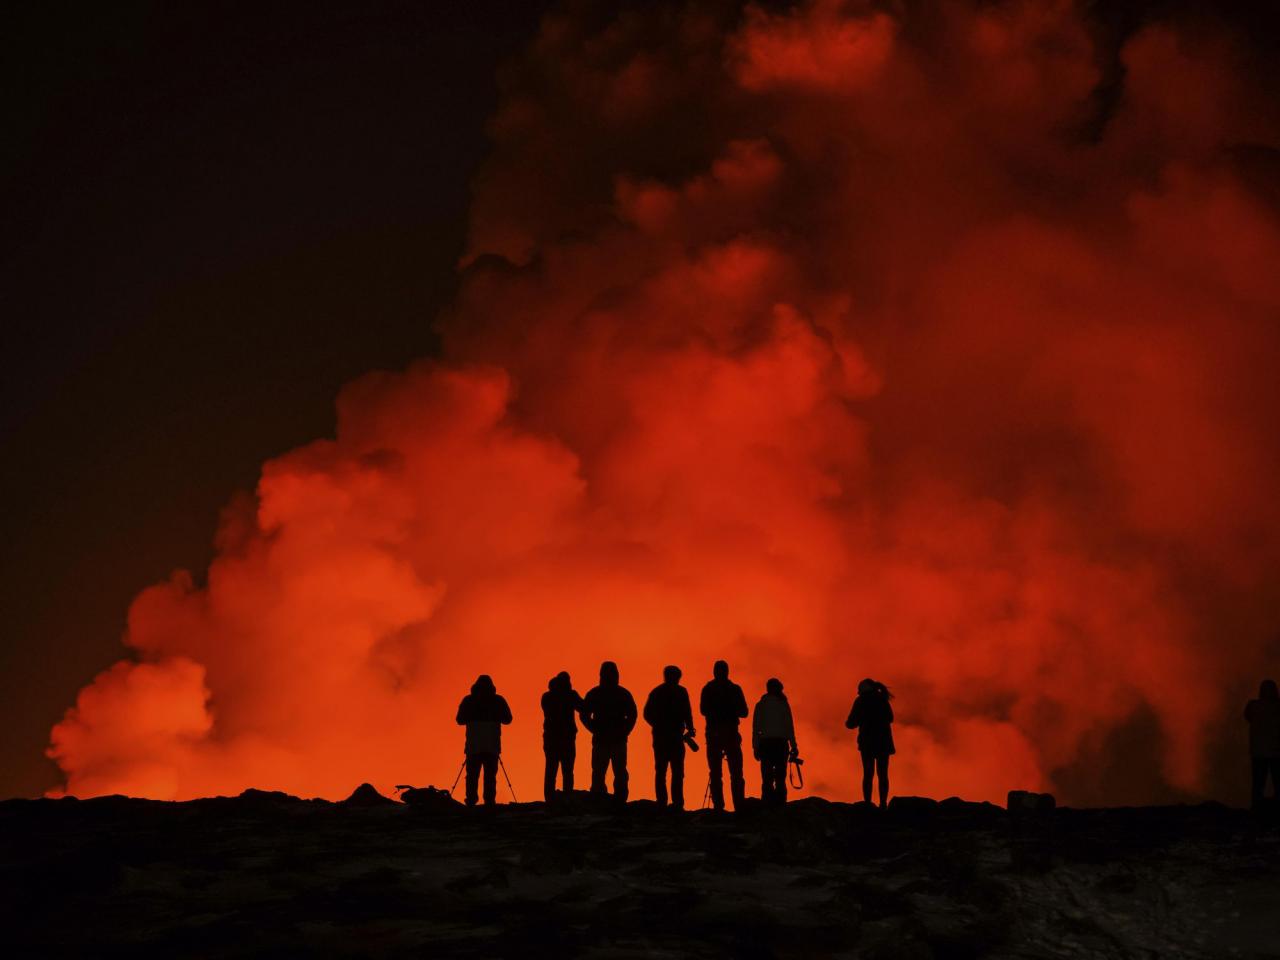 The third eruption of the volcano in Iceland has occurred since December, releasing molten rock into the atmosphere.